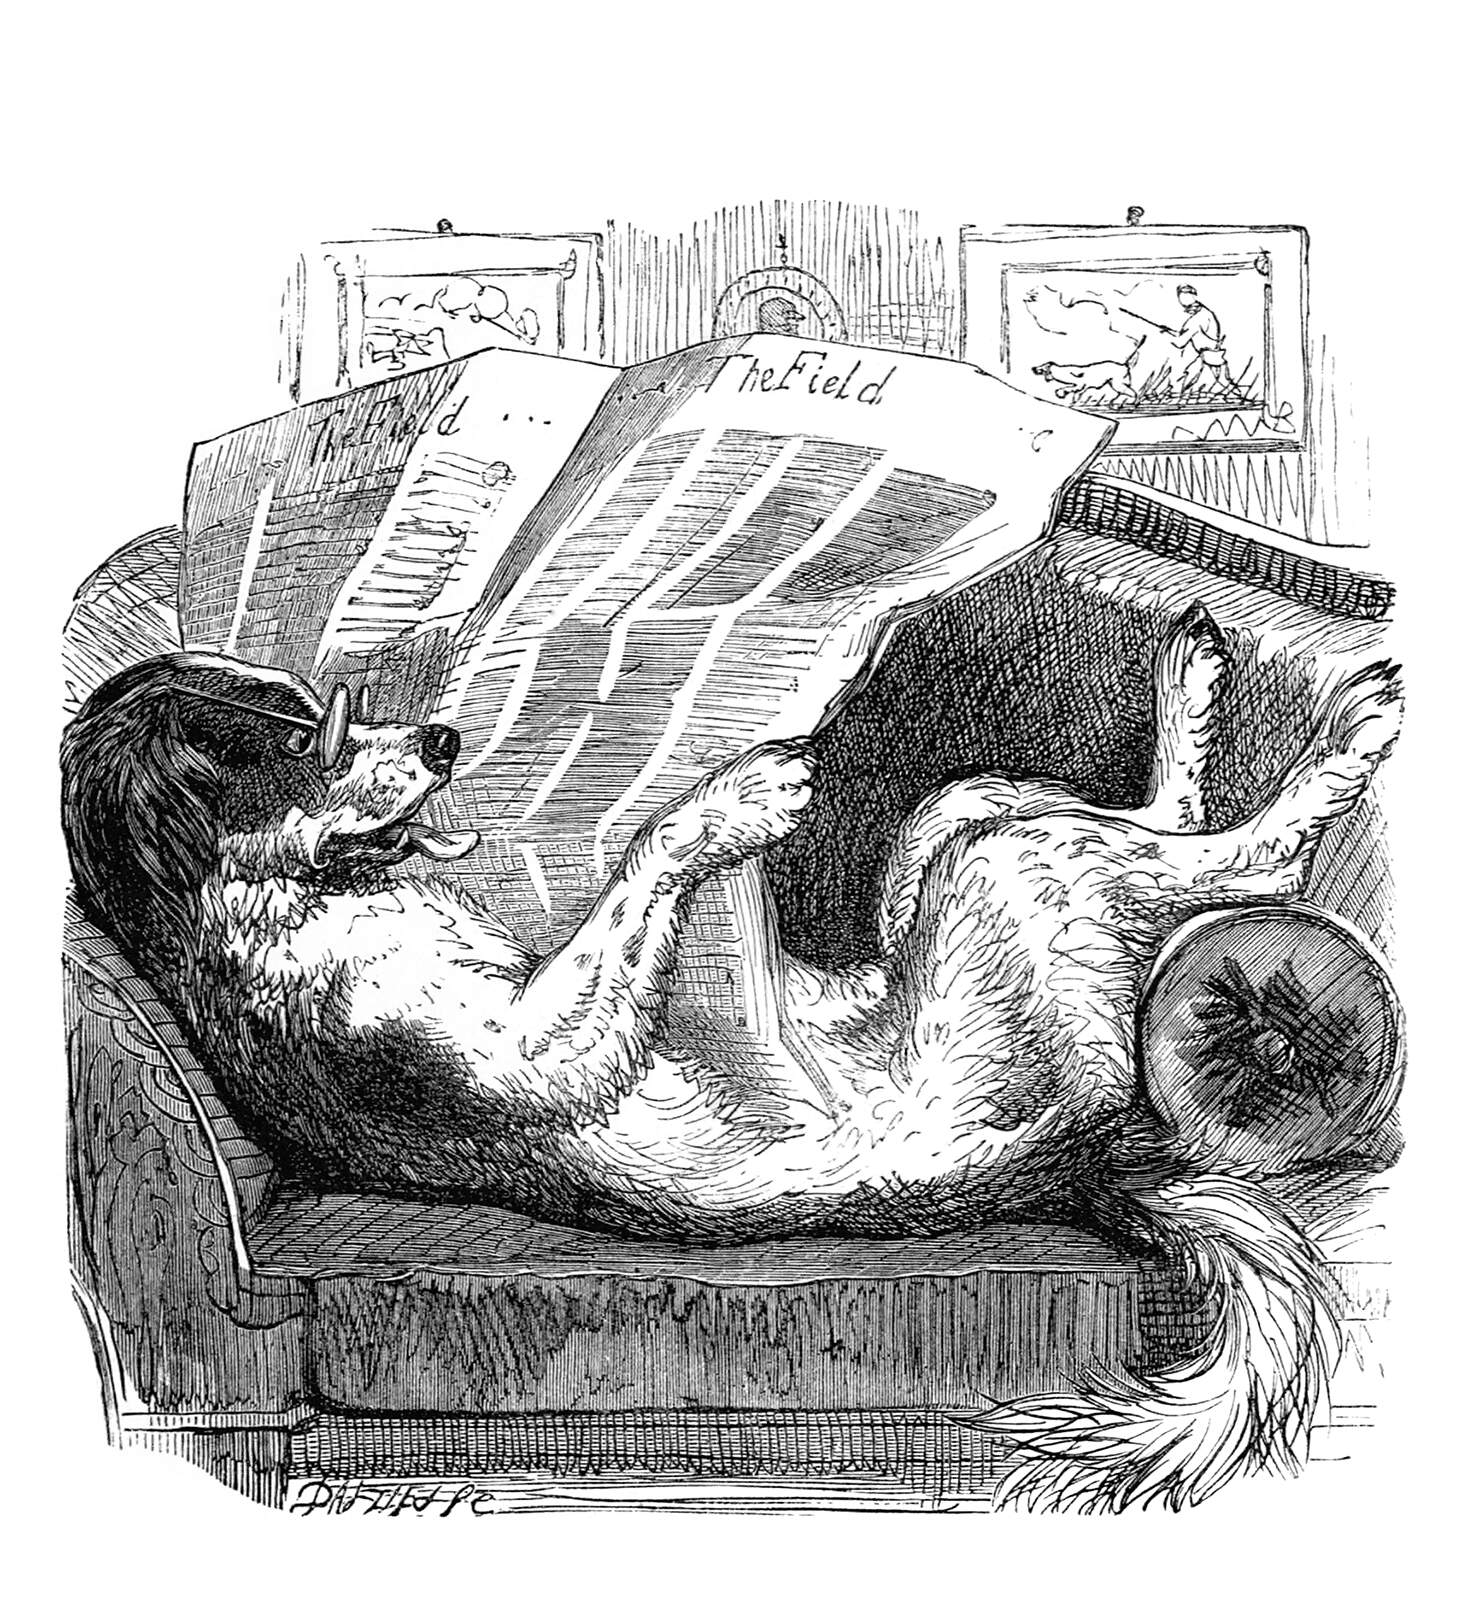 A dog reads the newspaper